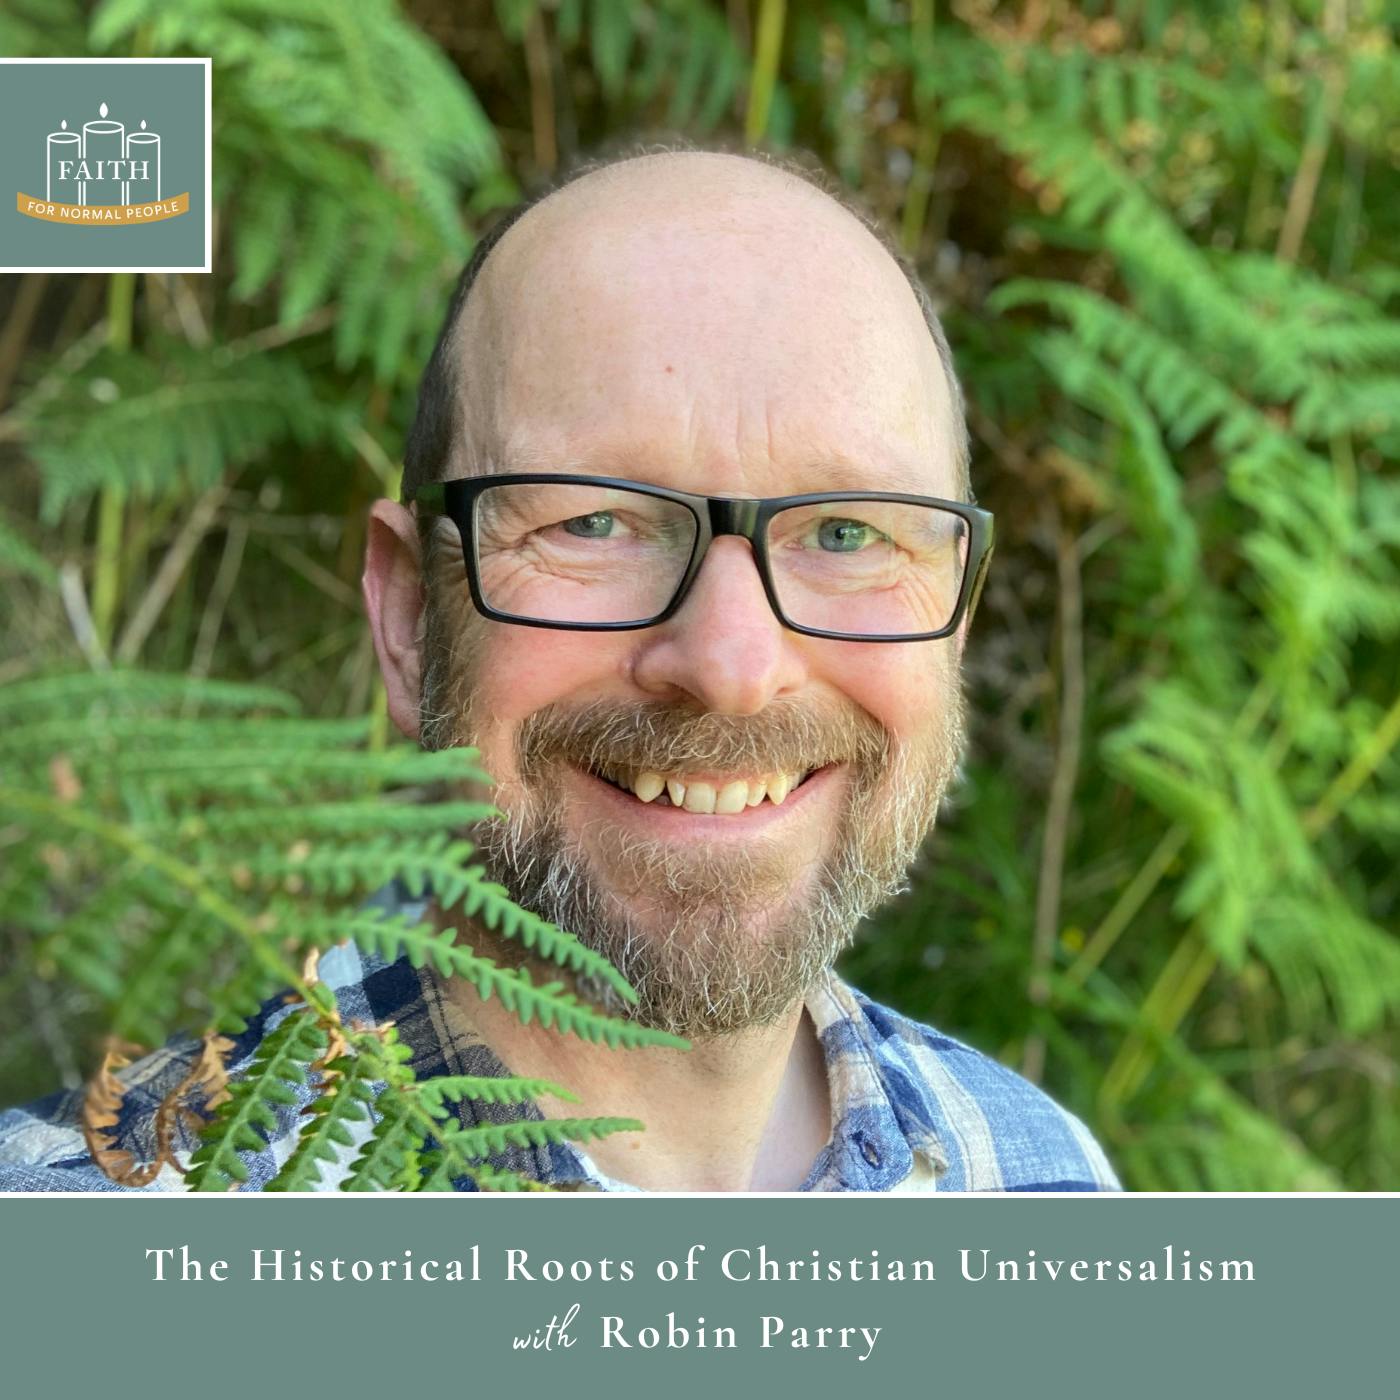 [Faith] Episode 7: Robin Parry - The Historical Roots of Christian Universalism